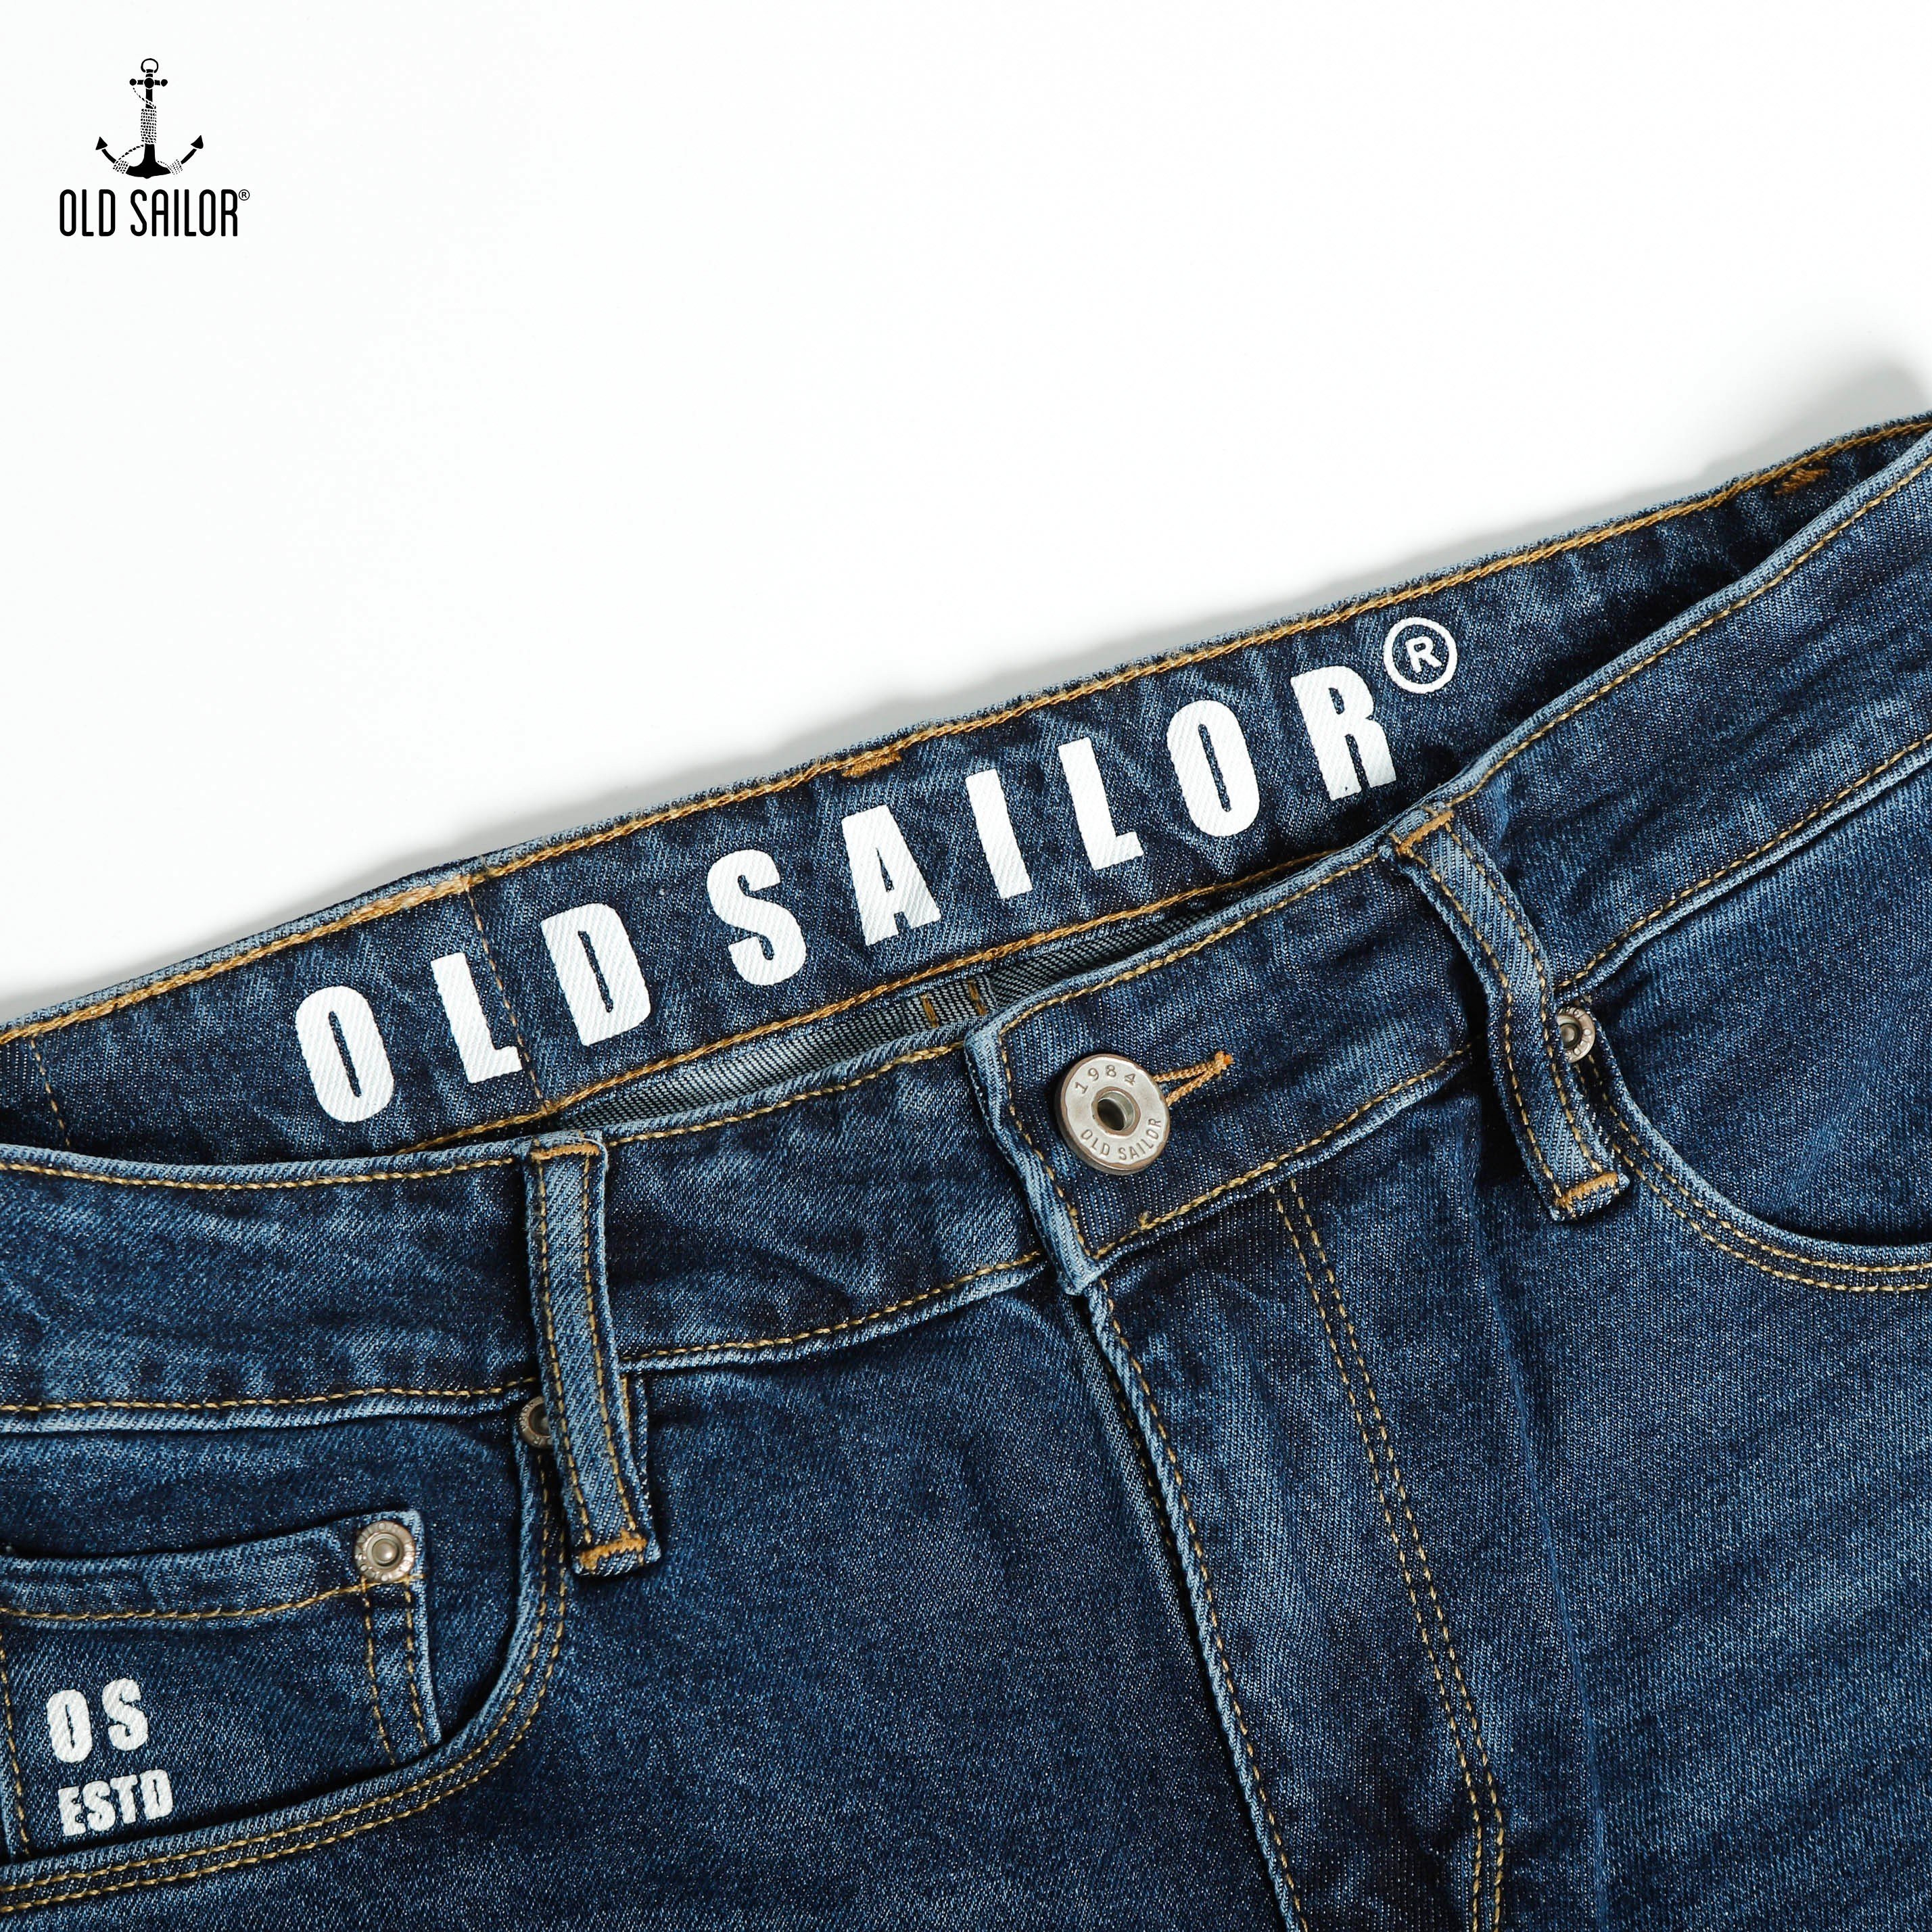 Quần jean nam ống suông Old Sailor - OSL STRAIGHT JEANS - 6687 - Big size upto 42